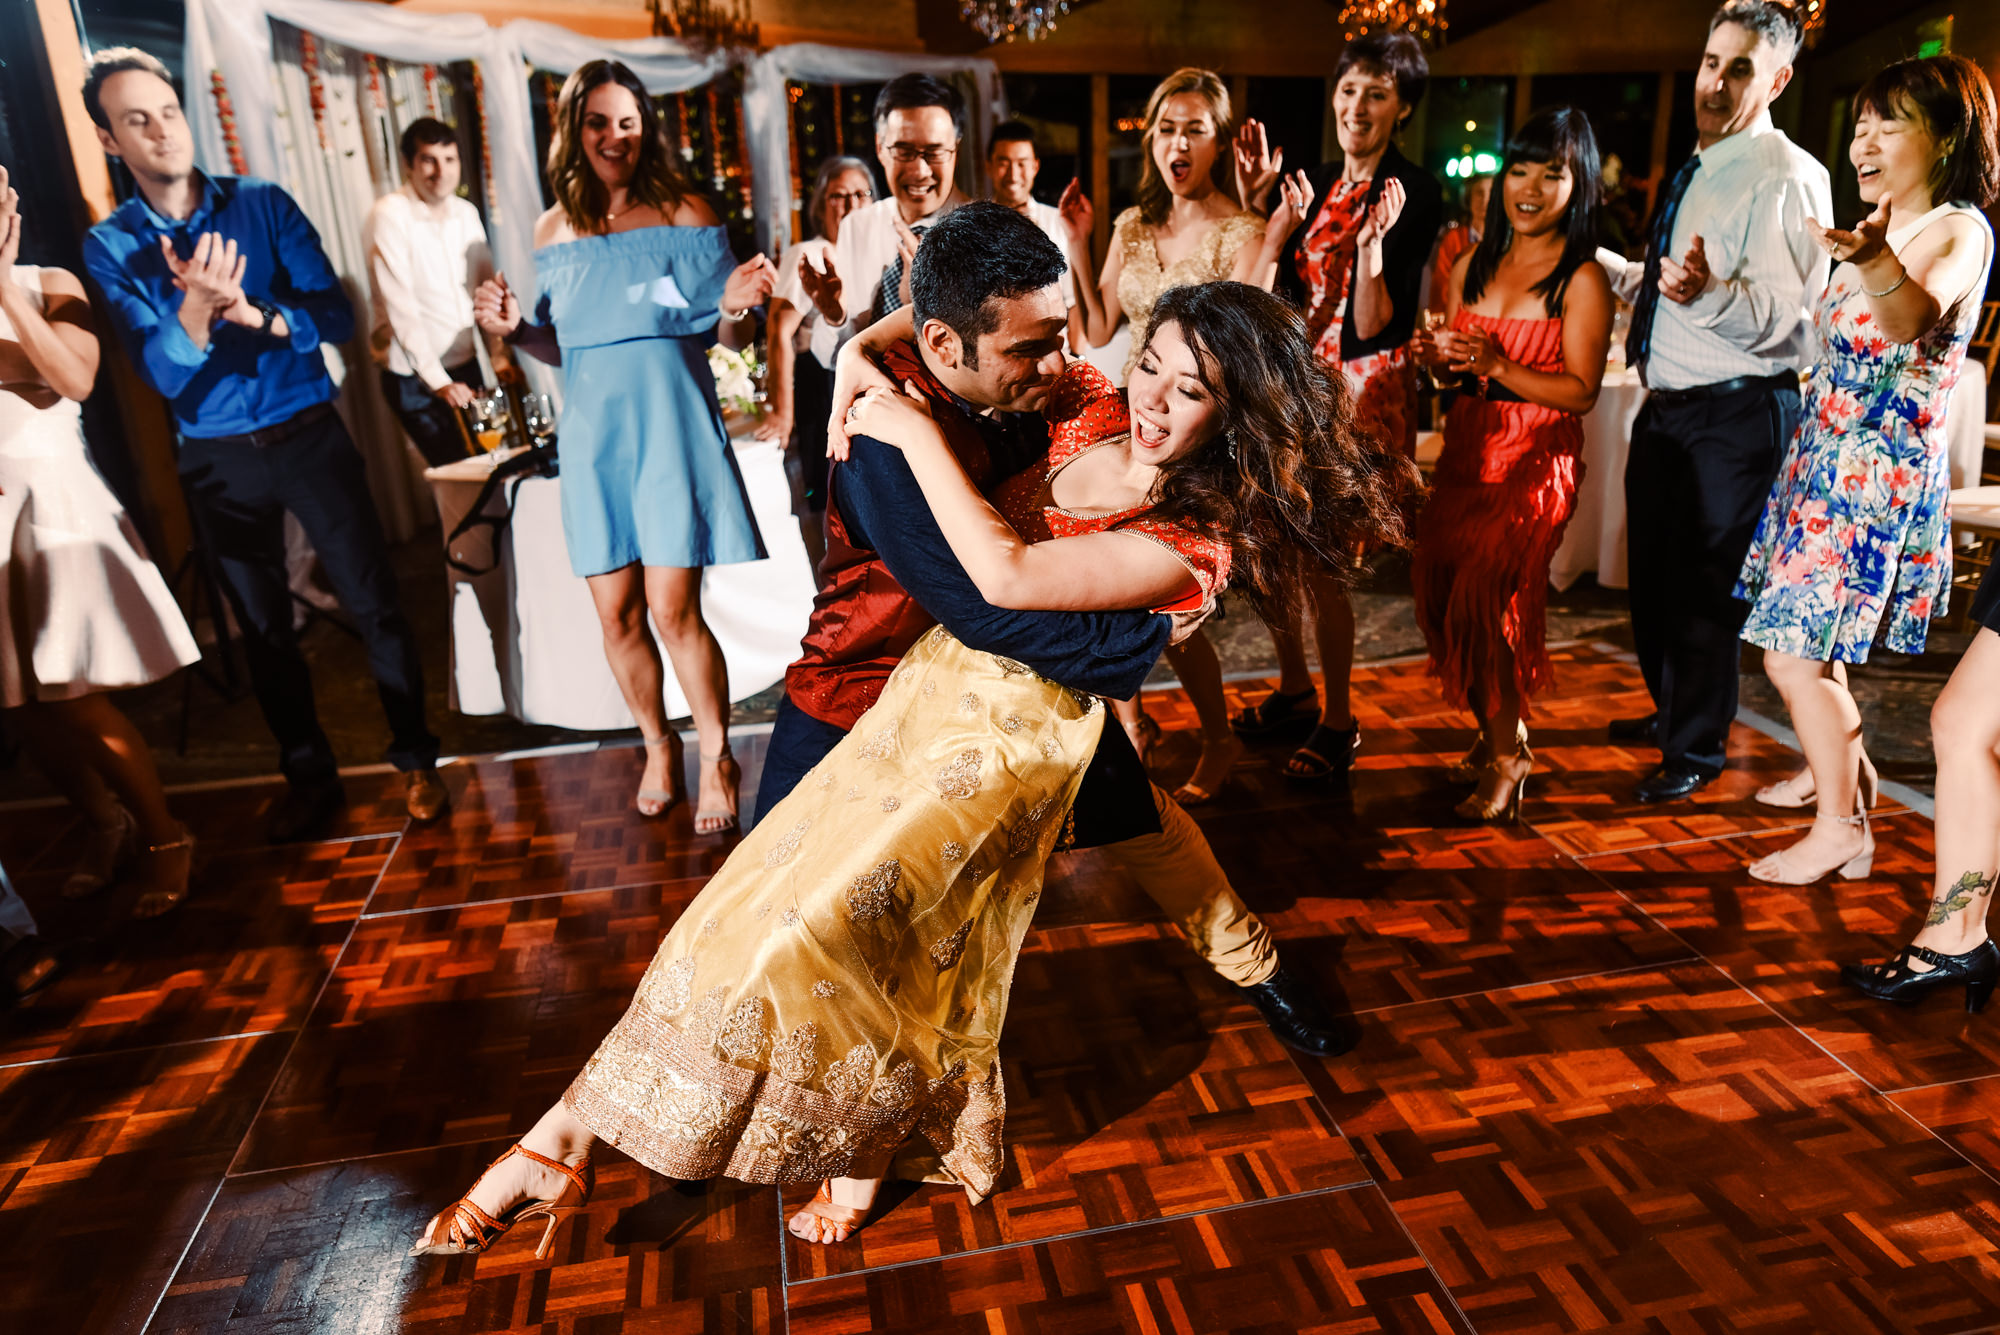 Ash and Kelly's hot salsa finale at their wedding reception